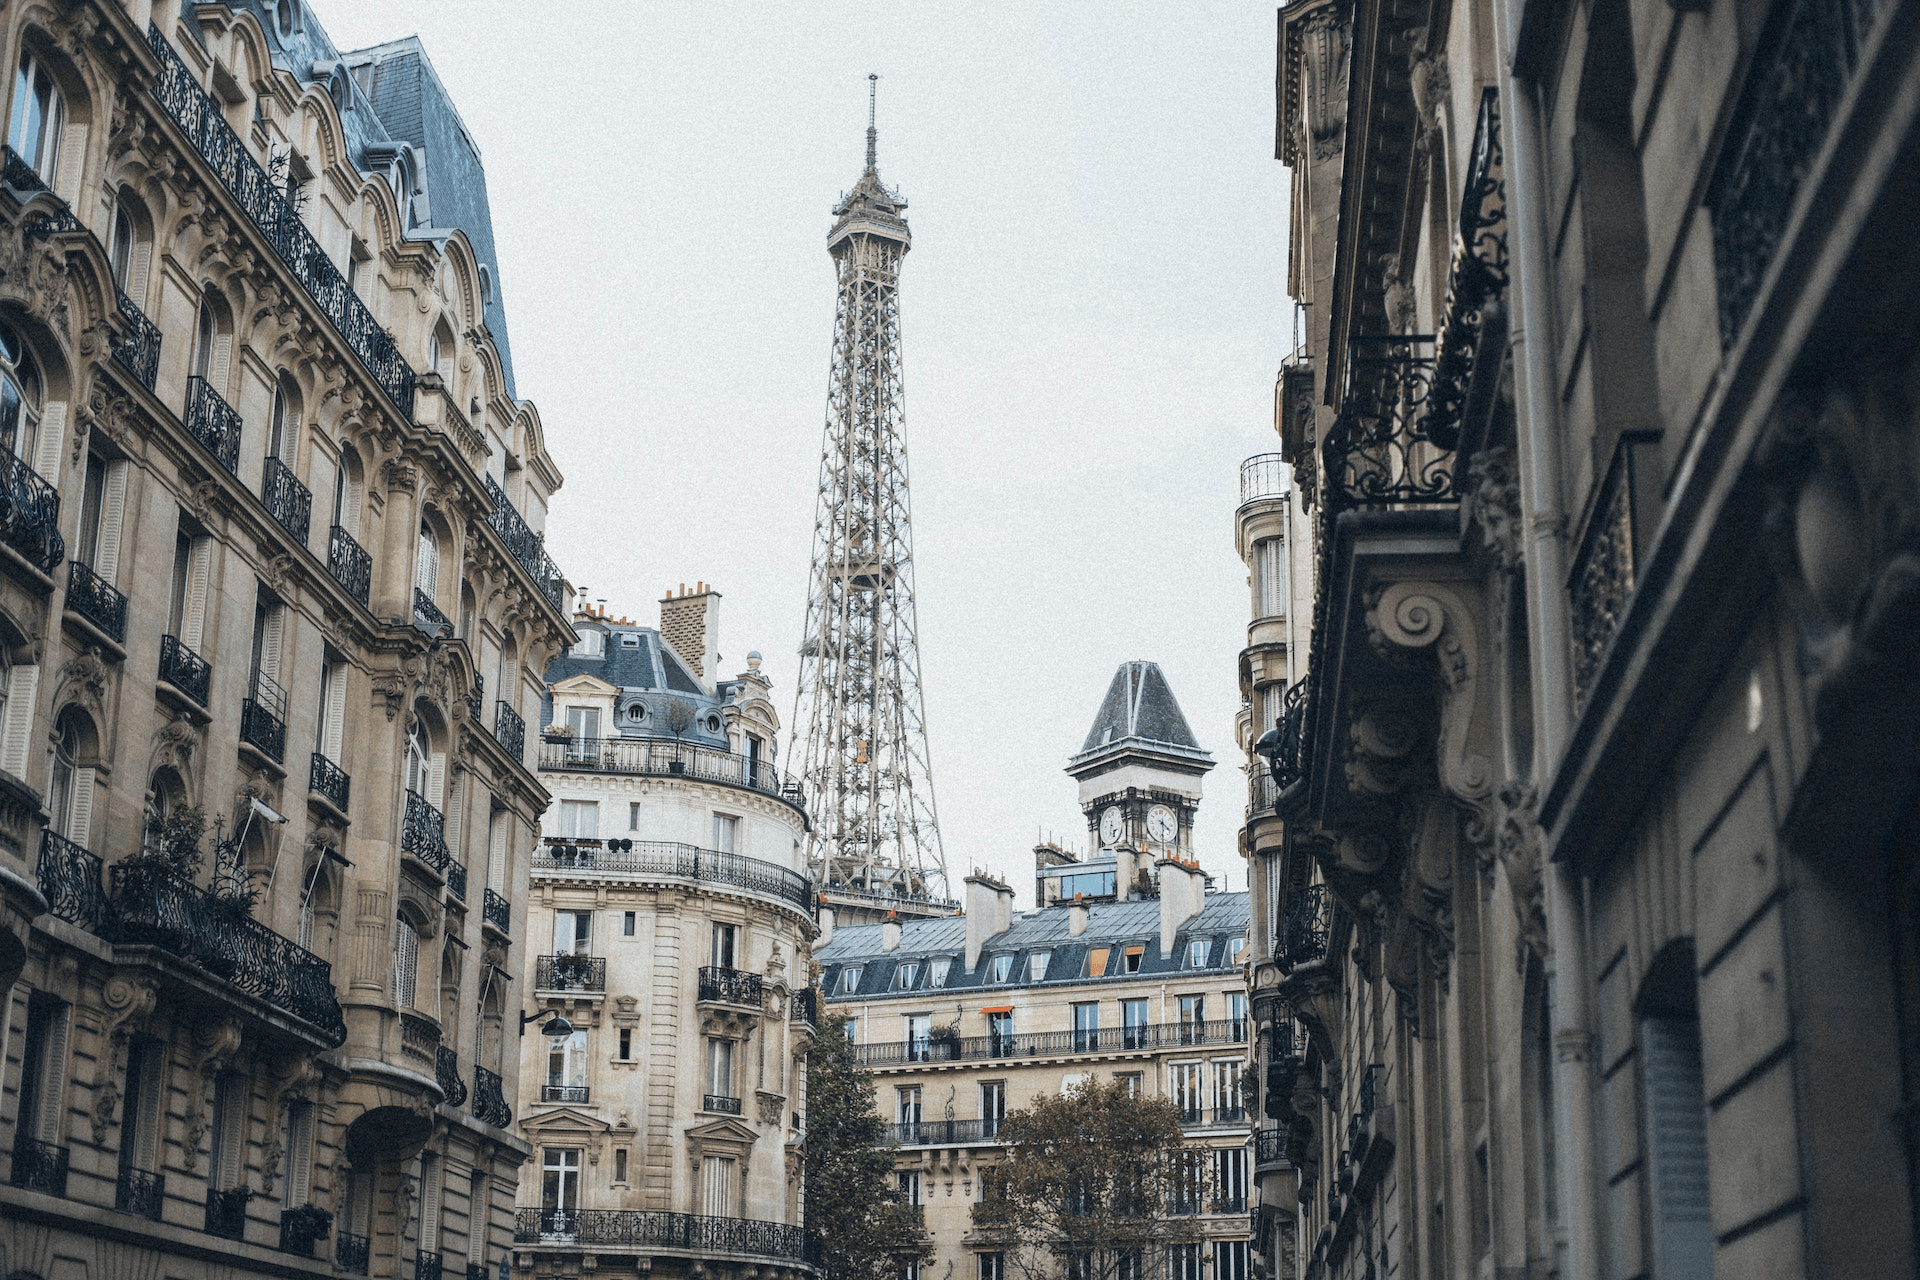 The cost of living in Paris is substantially higher than elsewhere in France. Photo by Karolina Grabowska from pexels.com